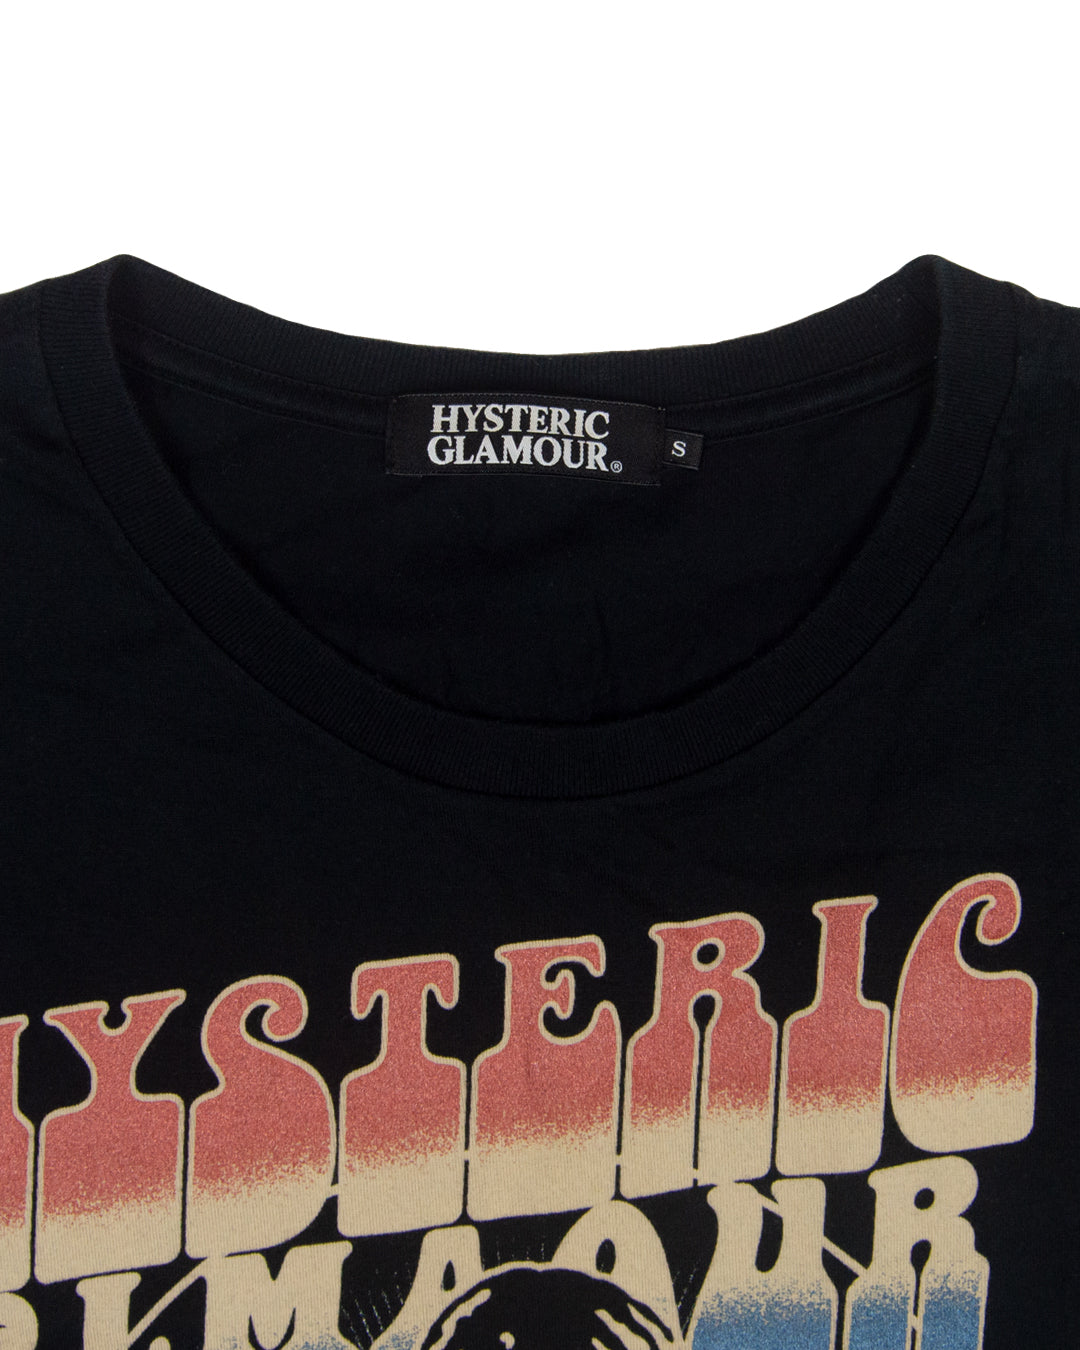 Hysteric Glamour Born To Lose Guitar Girl Long Sleeve Tee